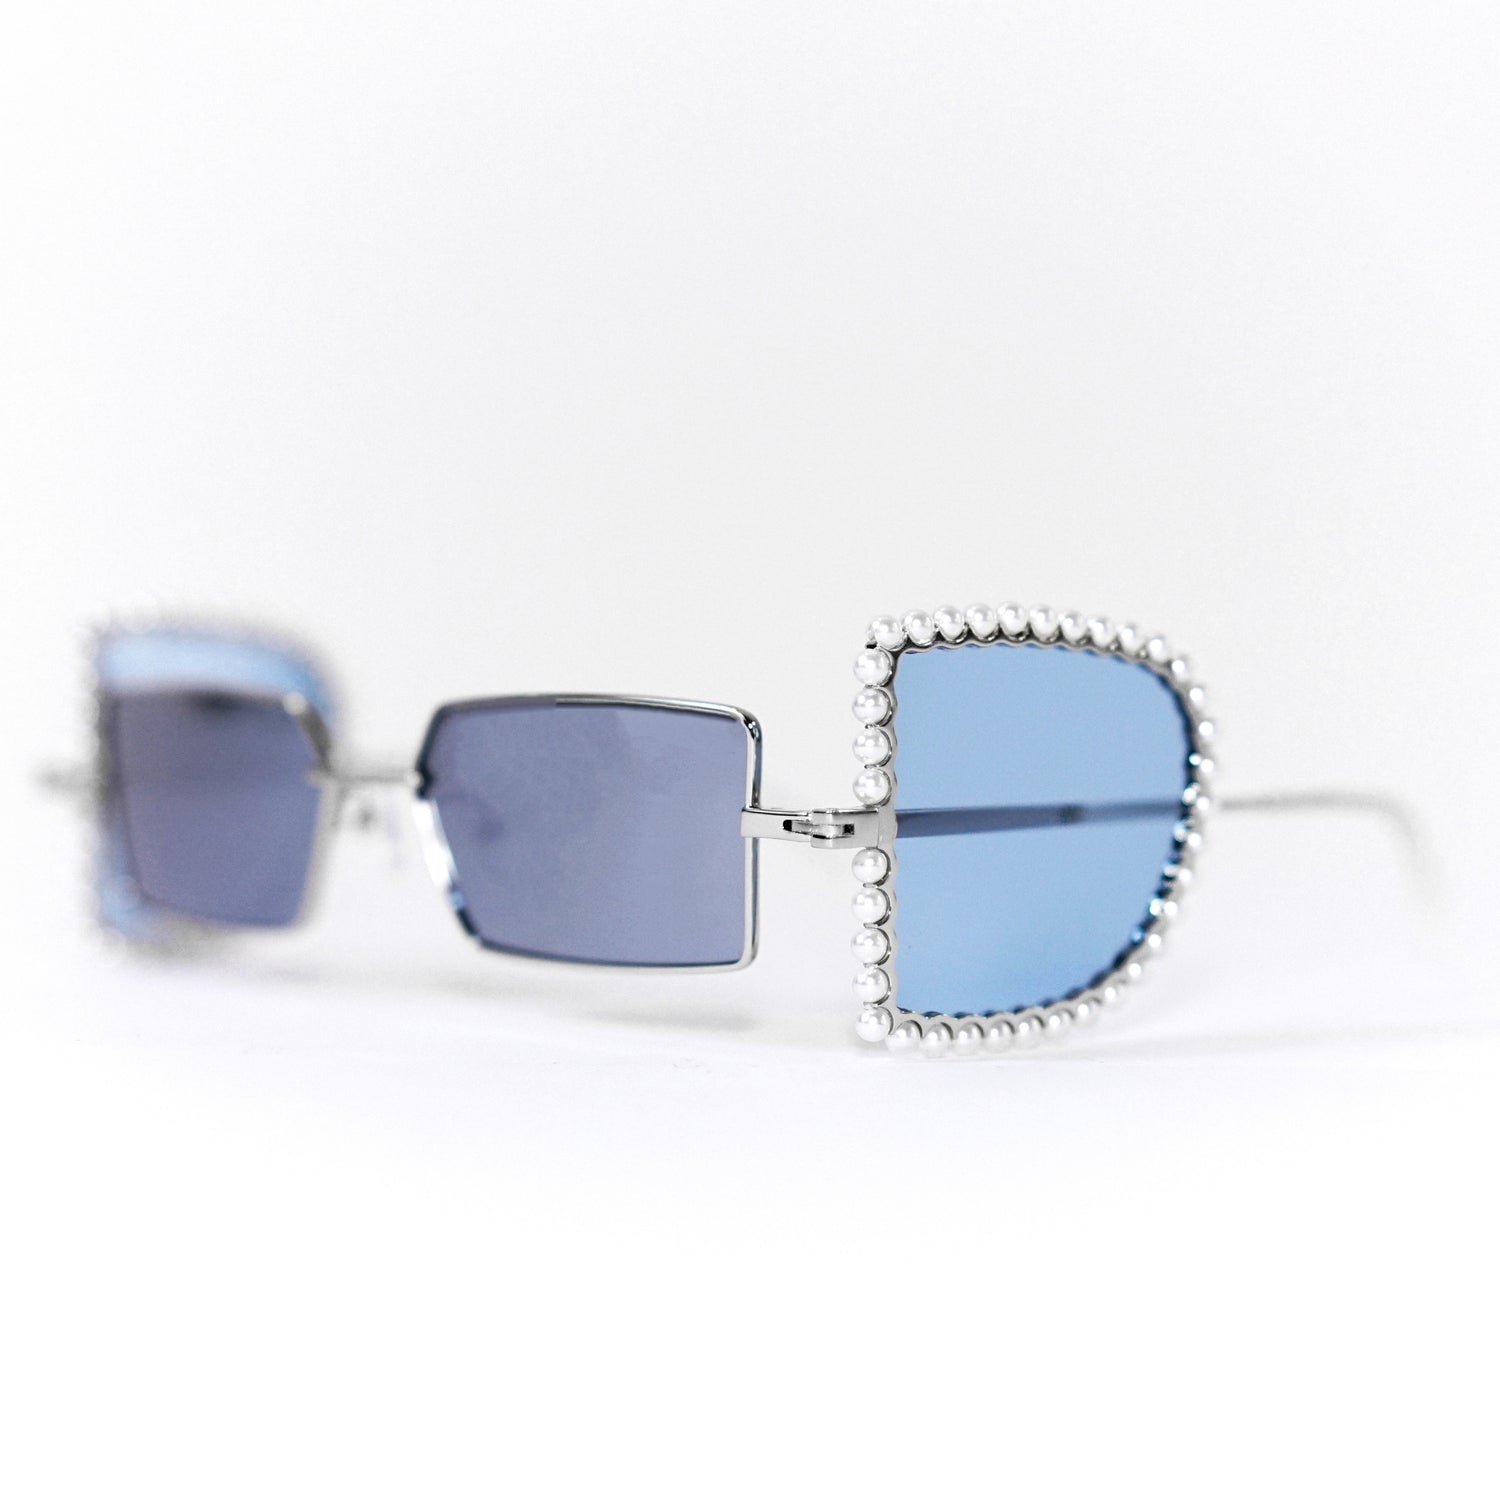 sunglasses with pearl rimmed window opened and blue polaroid lens 45 angled